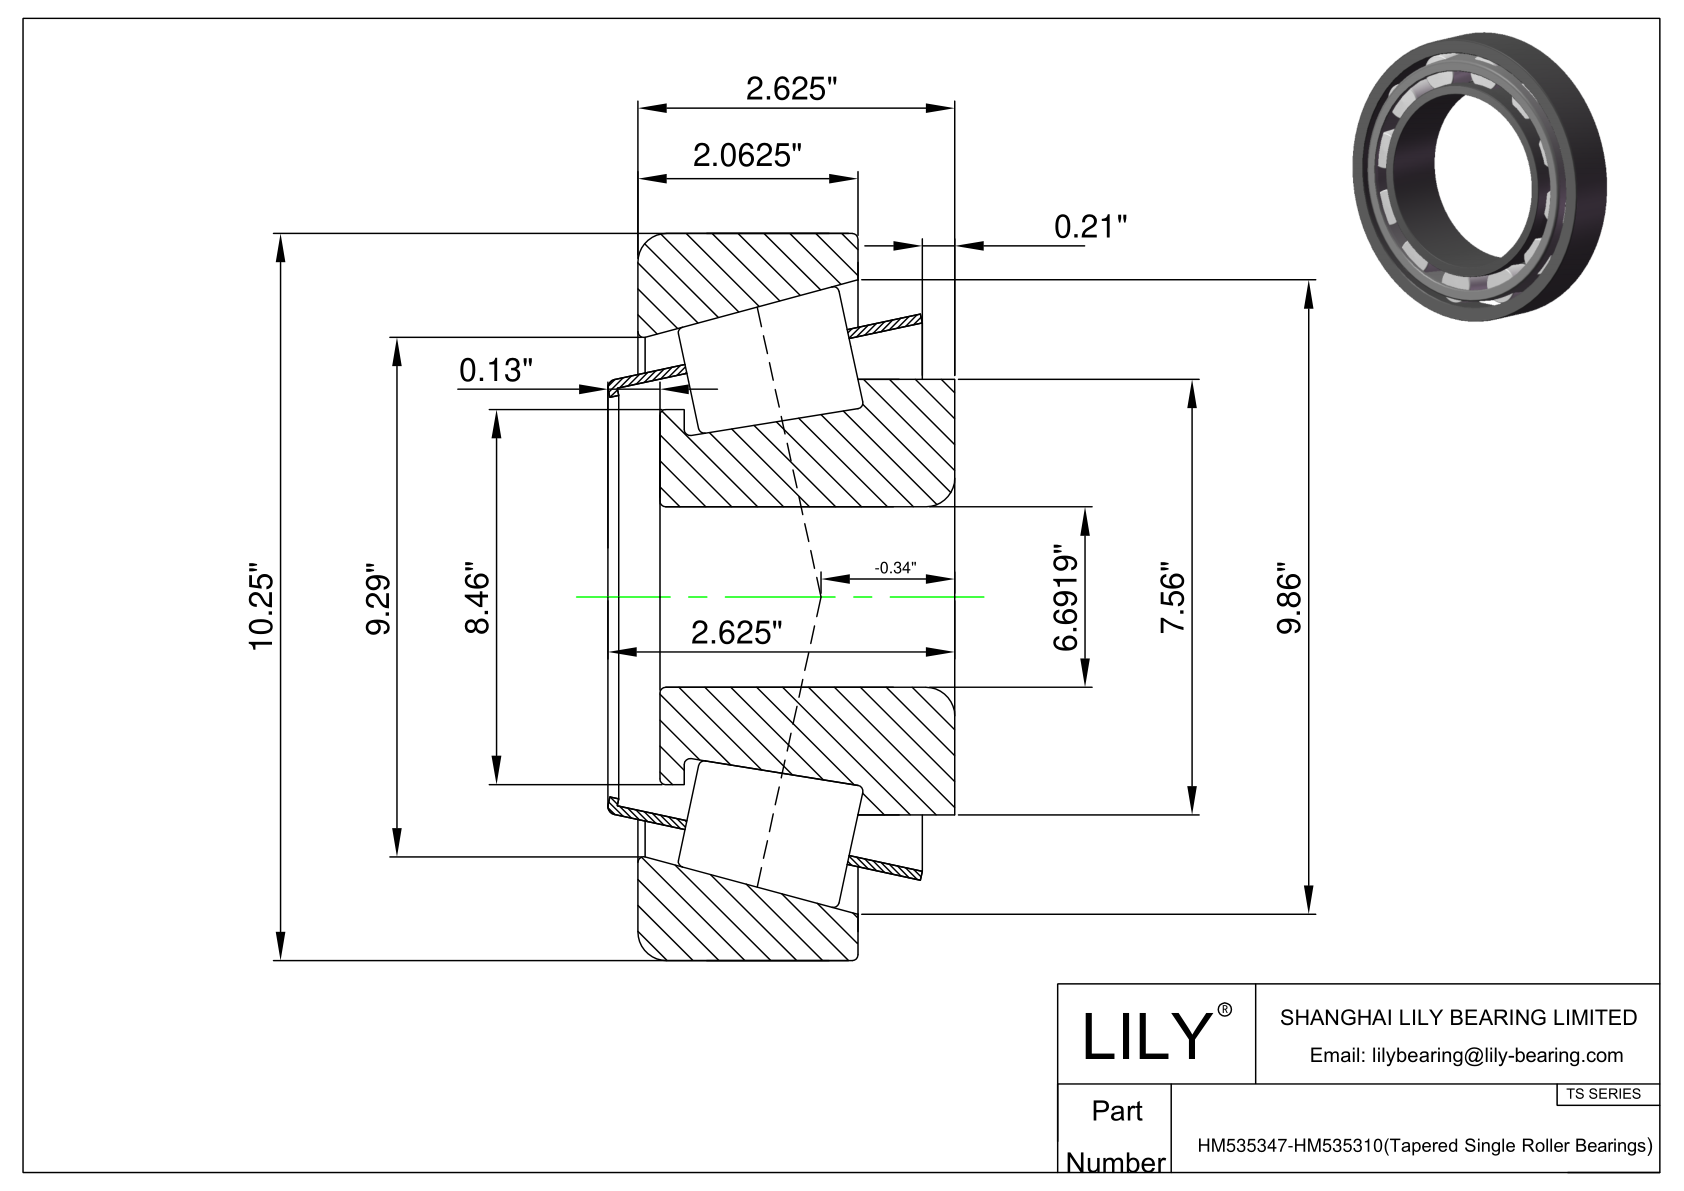 HM535347-HM535310 TS (Tapered Single Roller Bearings) (Imperial) cad drawing